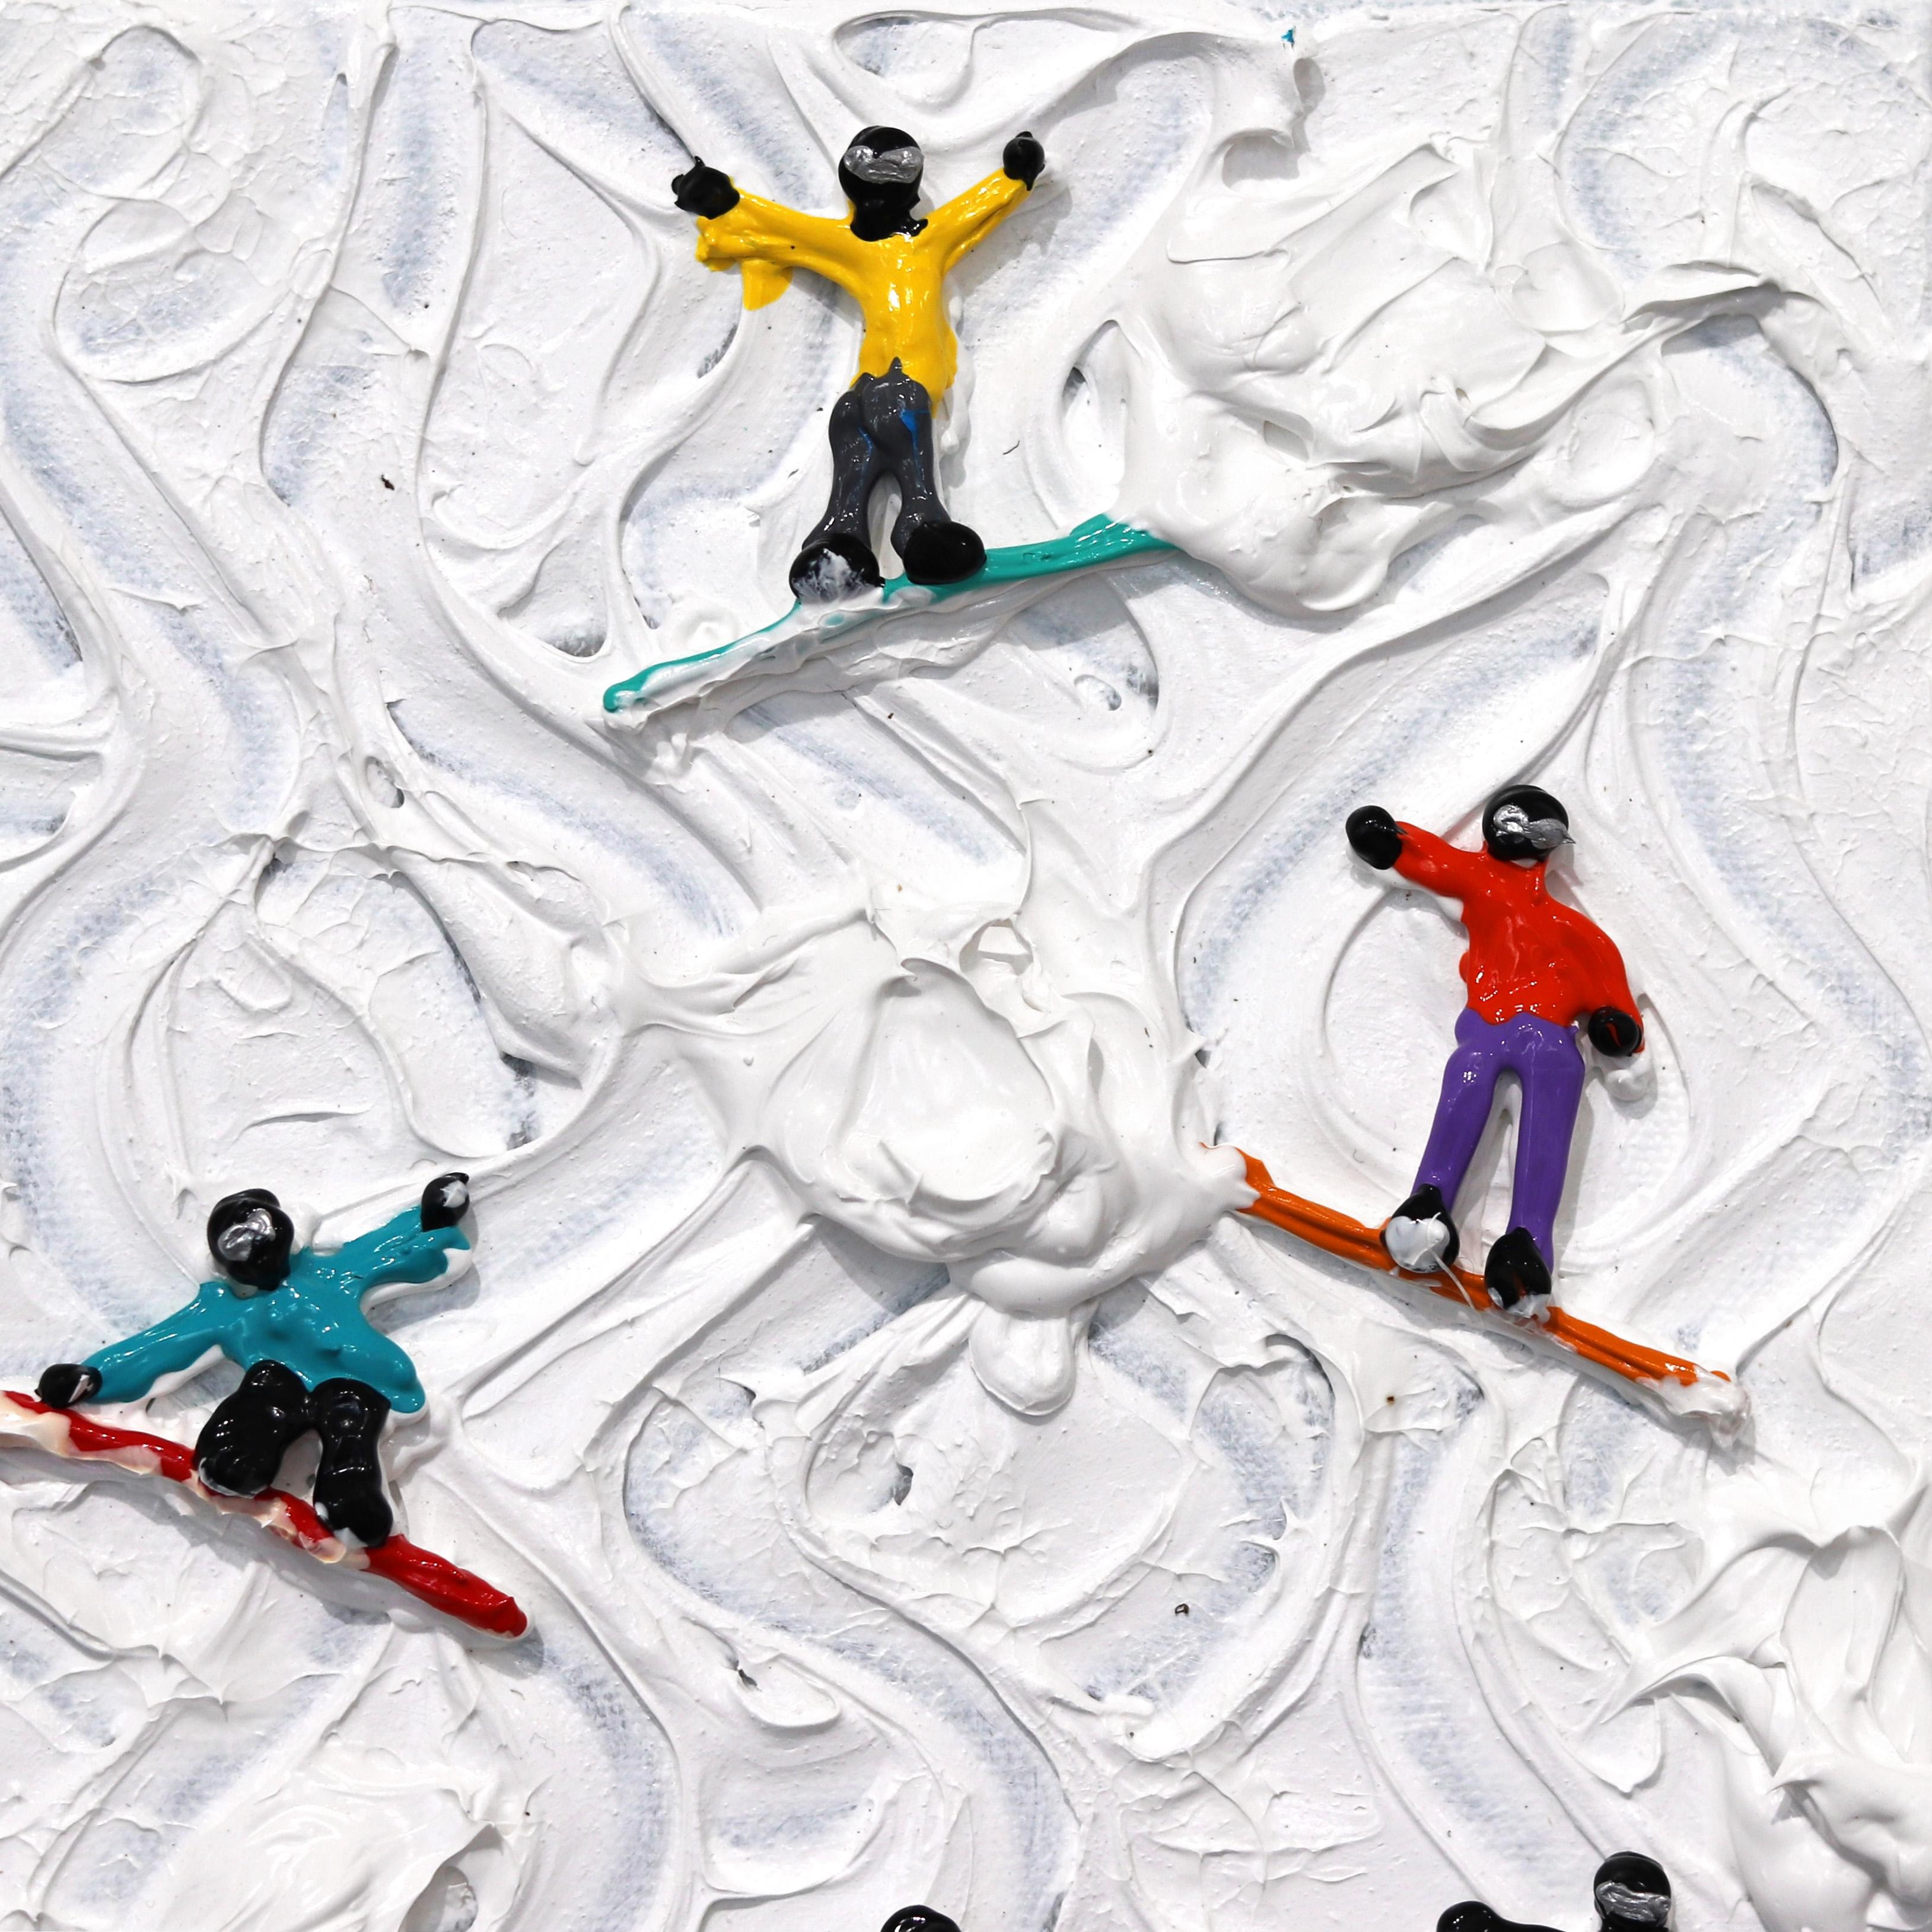 Just Snowboarders - Three Dimensional Textural Winter Landscape Painting - Contemporary Mixed Media Art by Elizabeth Langreiter